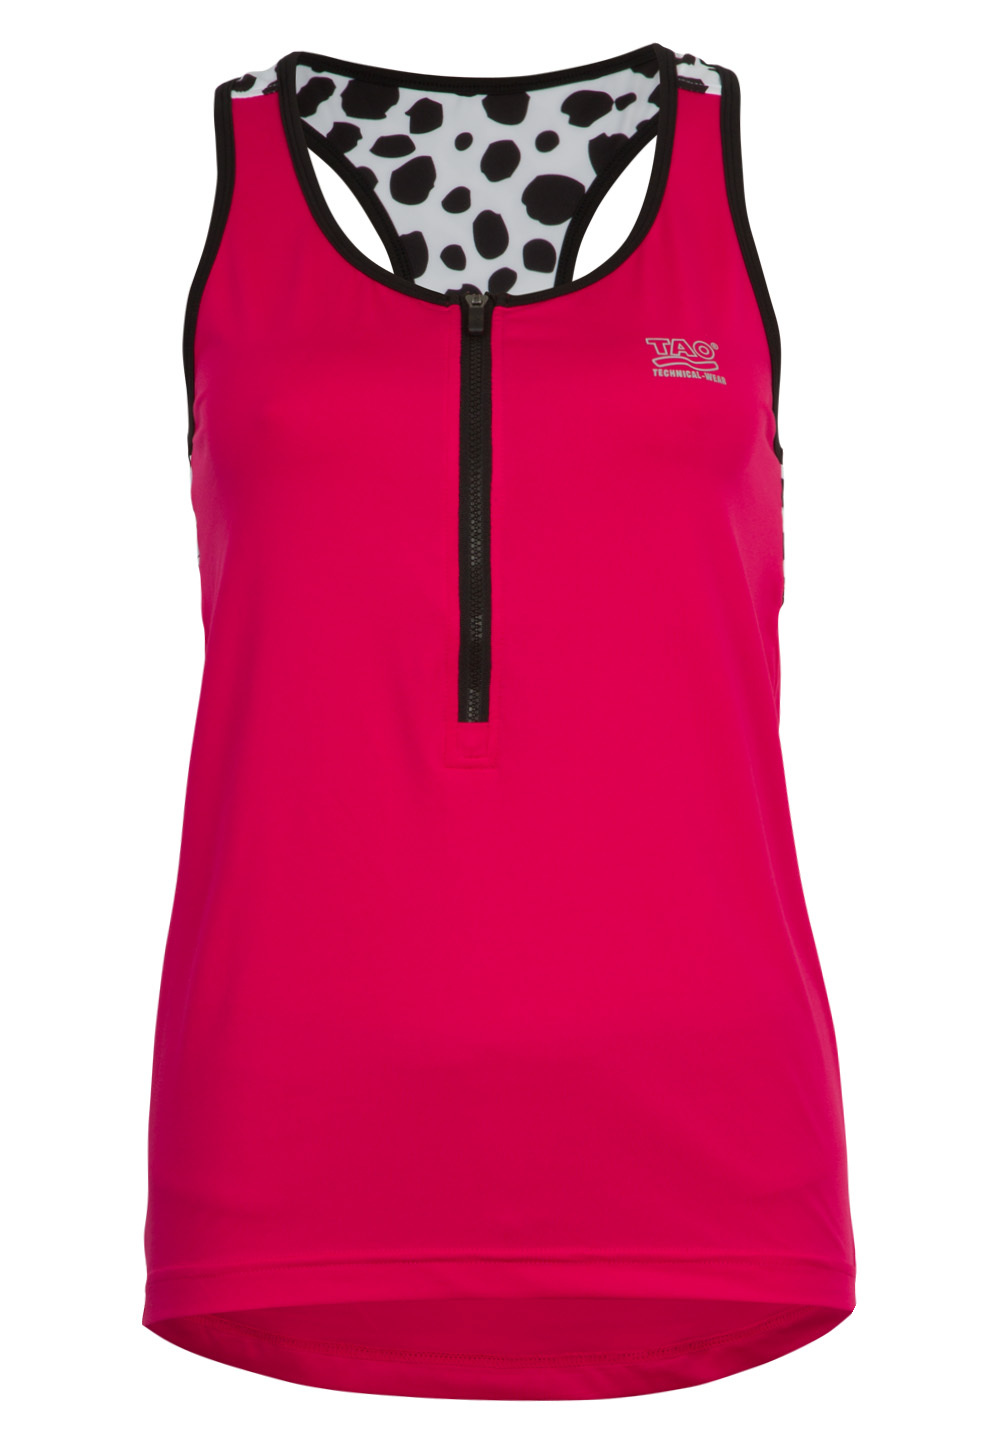 https://www.laufoutlet.de/out/pictures/master/product/1/pulse-tank-top-34411-6228aa8d99f79.jpg